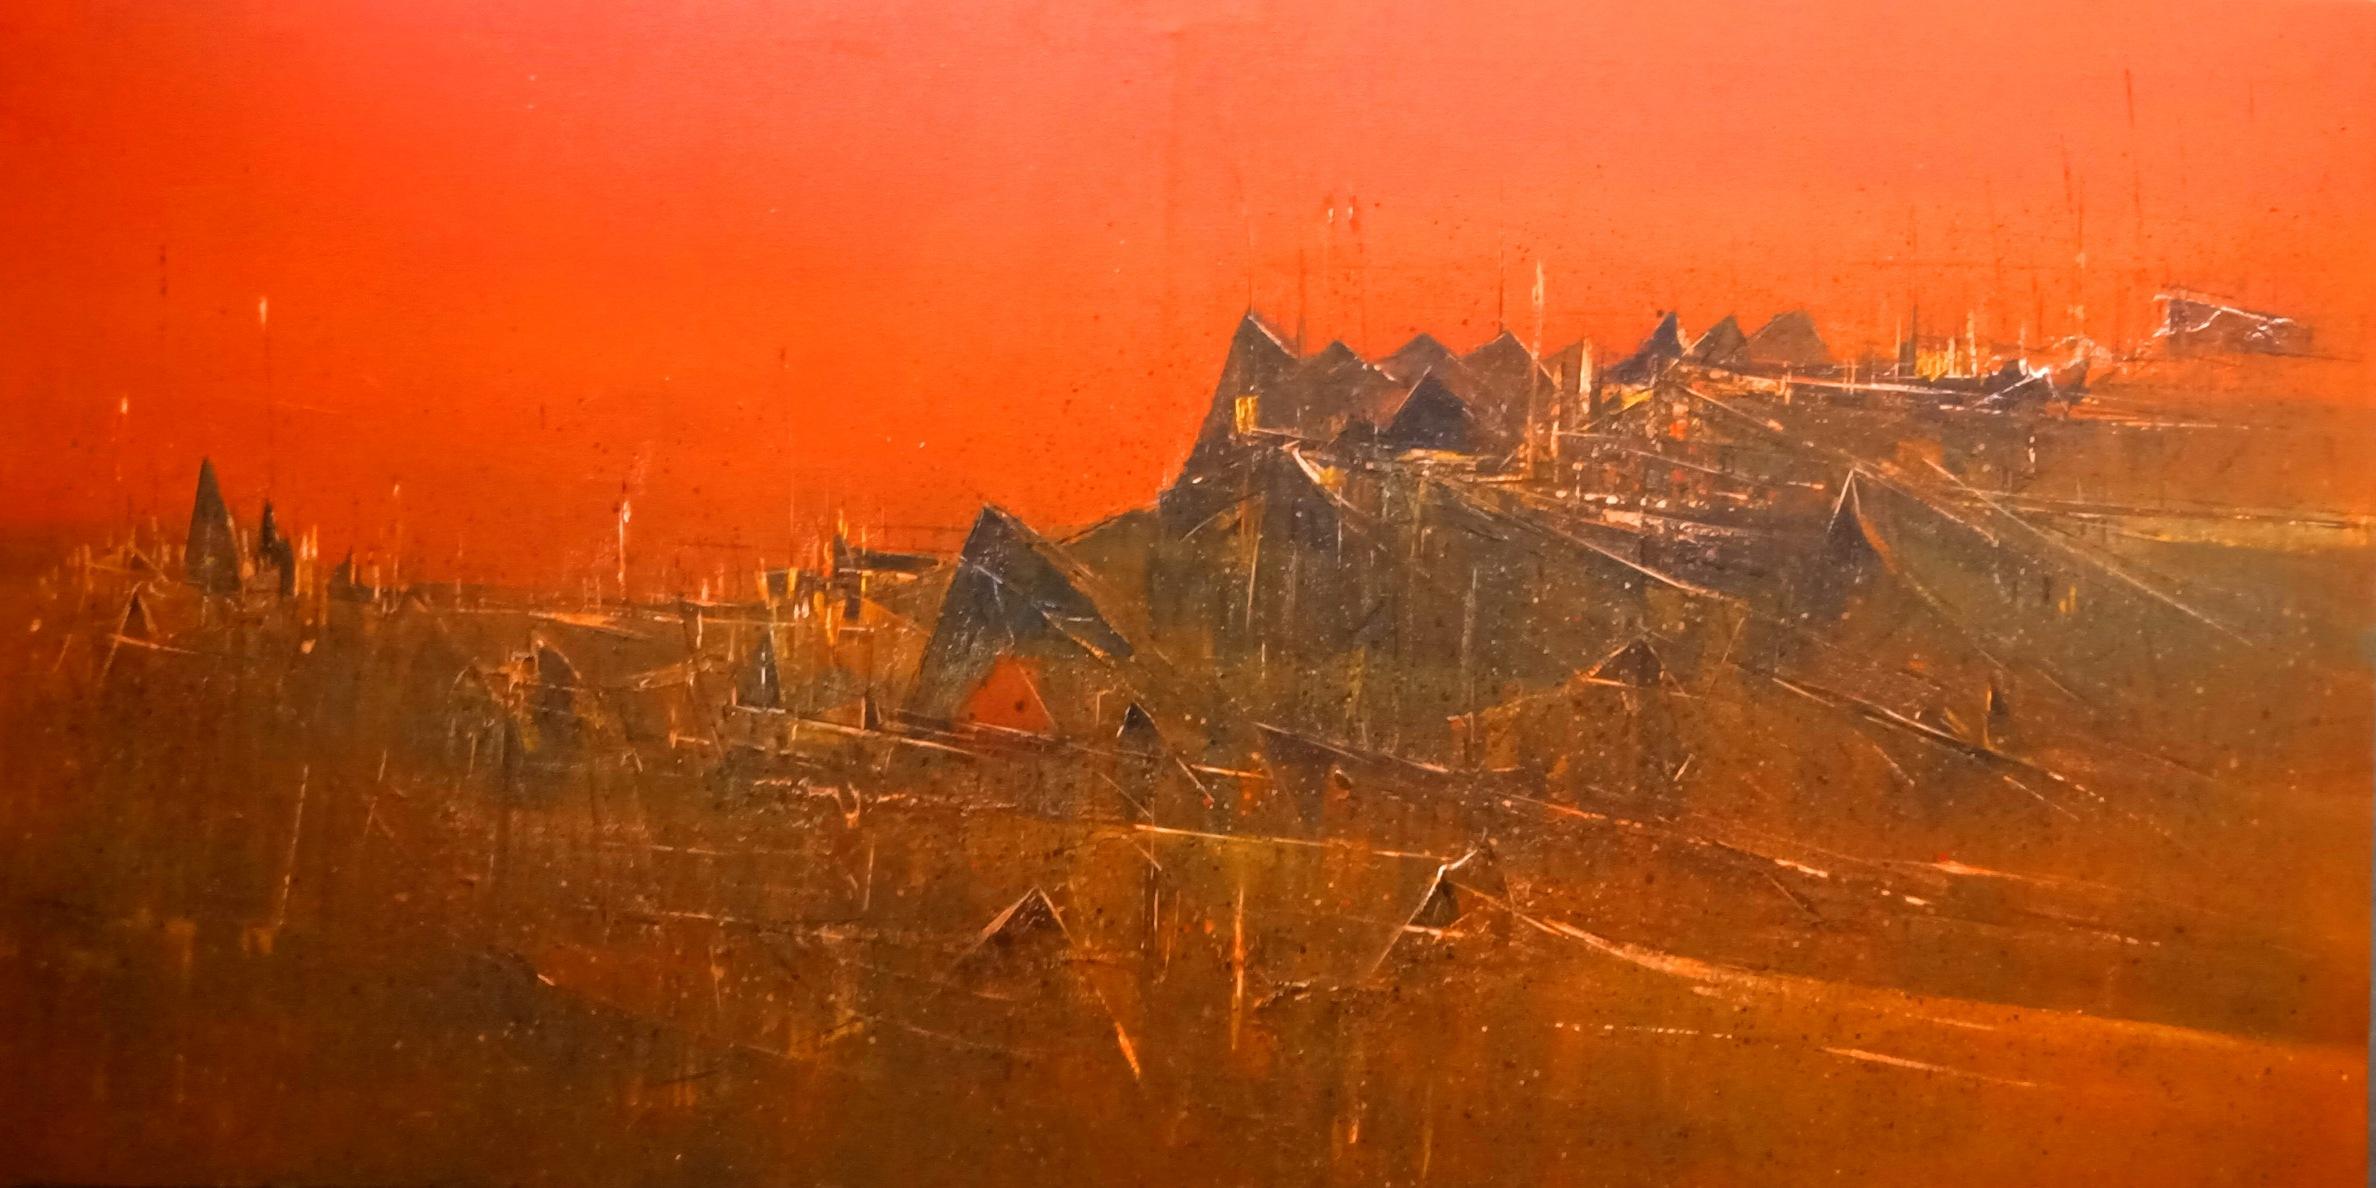 Dnyaneshwar Dhavale Abstract Painting - Untitled, Acrylic on Canvas, Orange, Black by Contemporary Artist "In Stock"